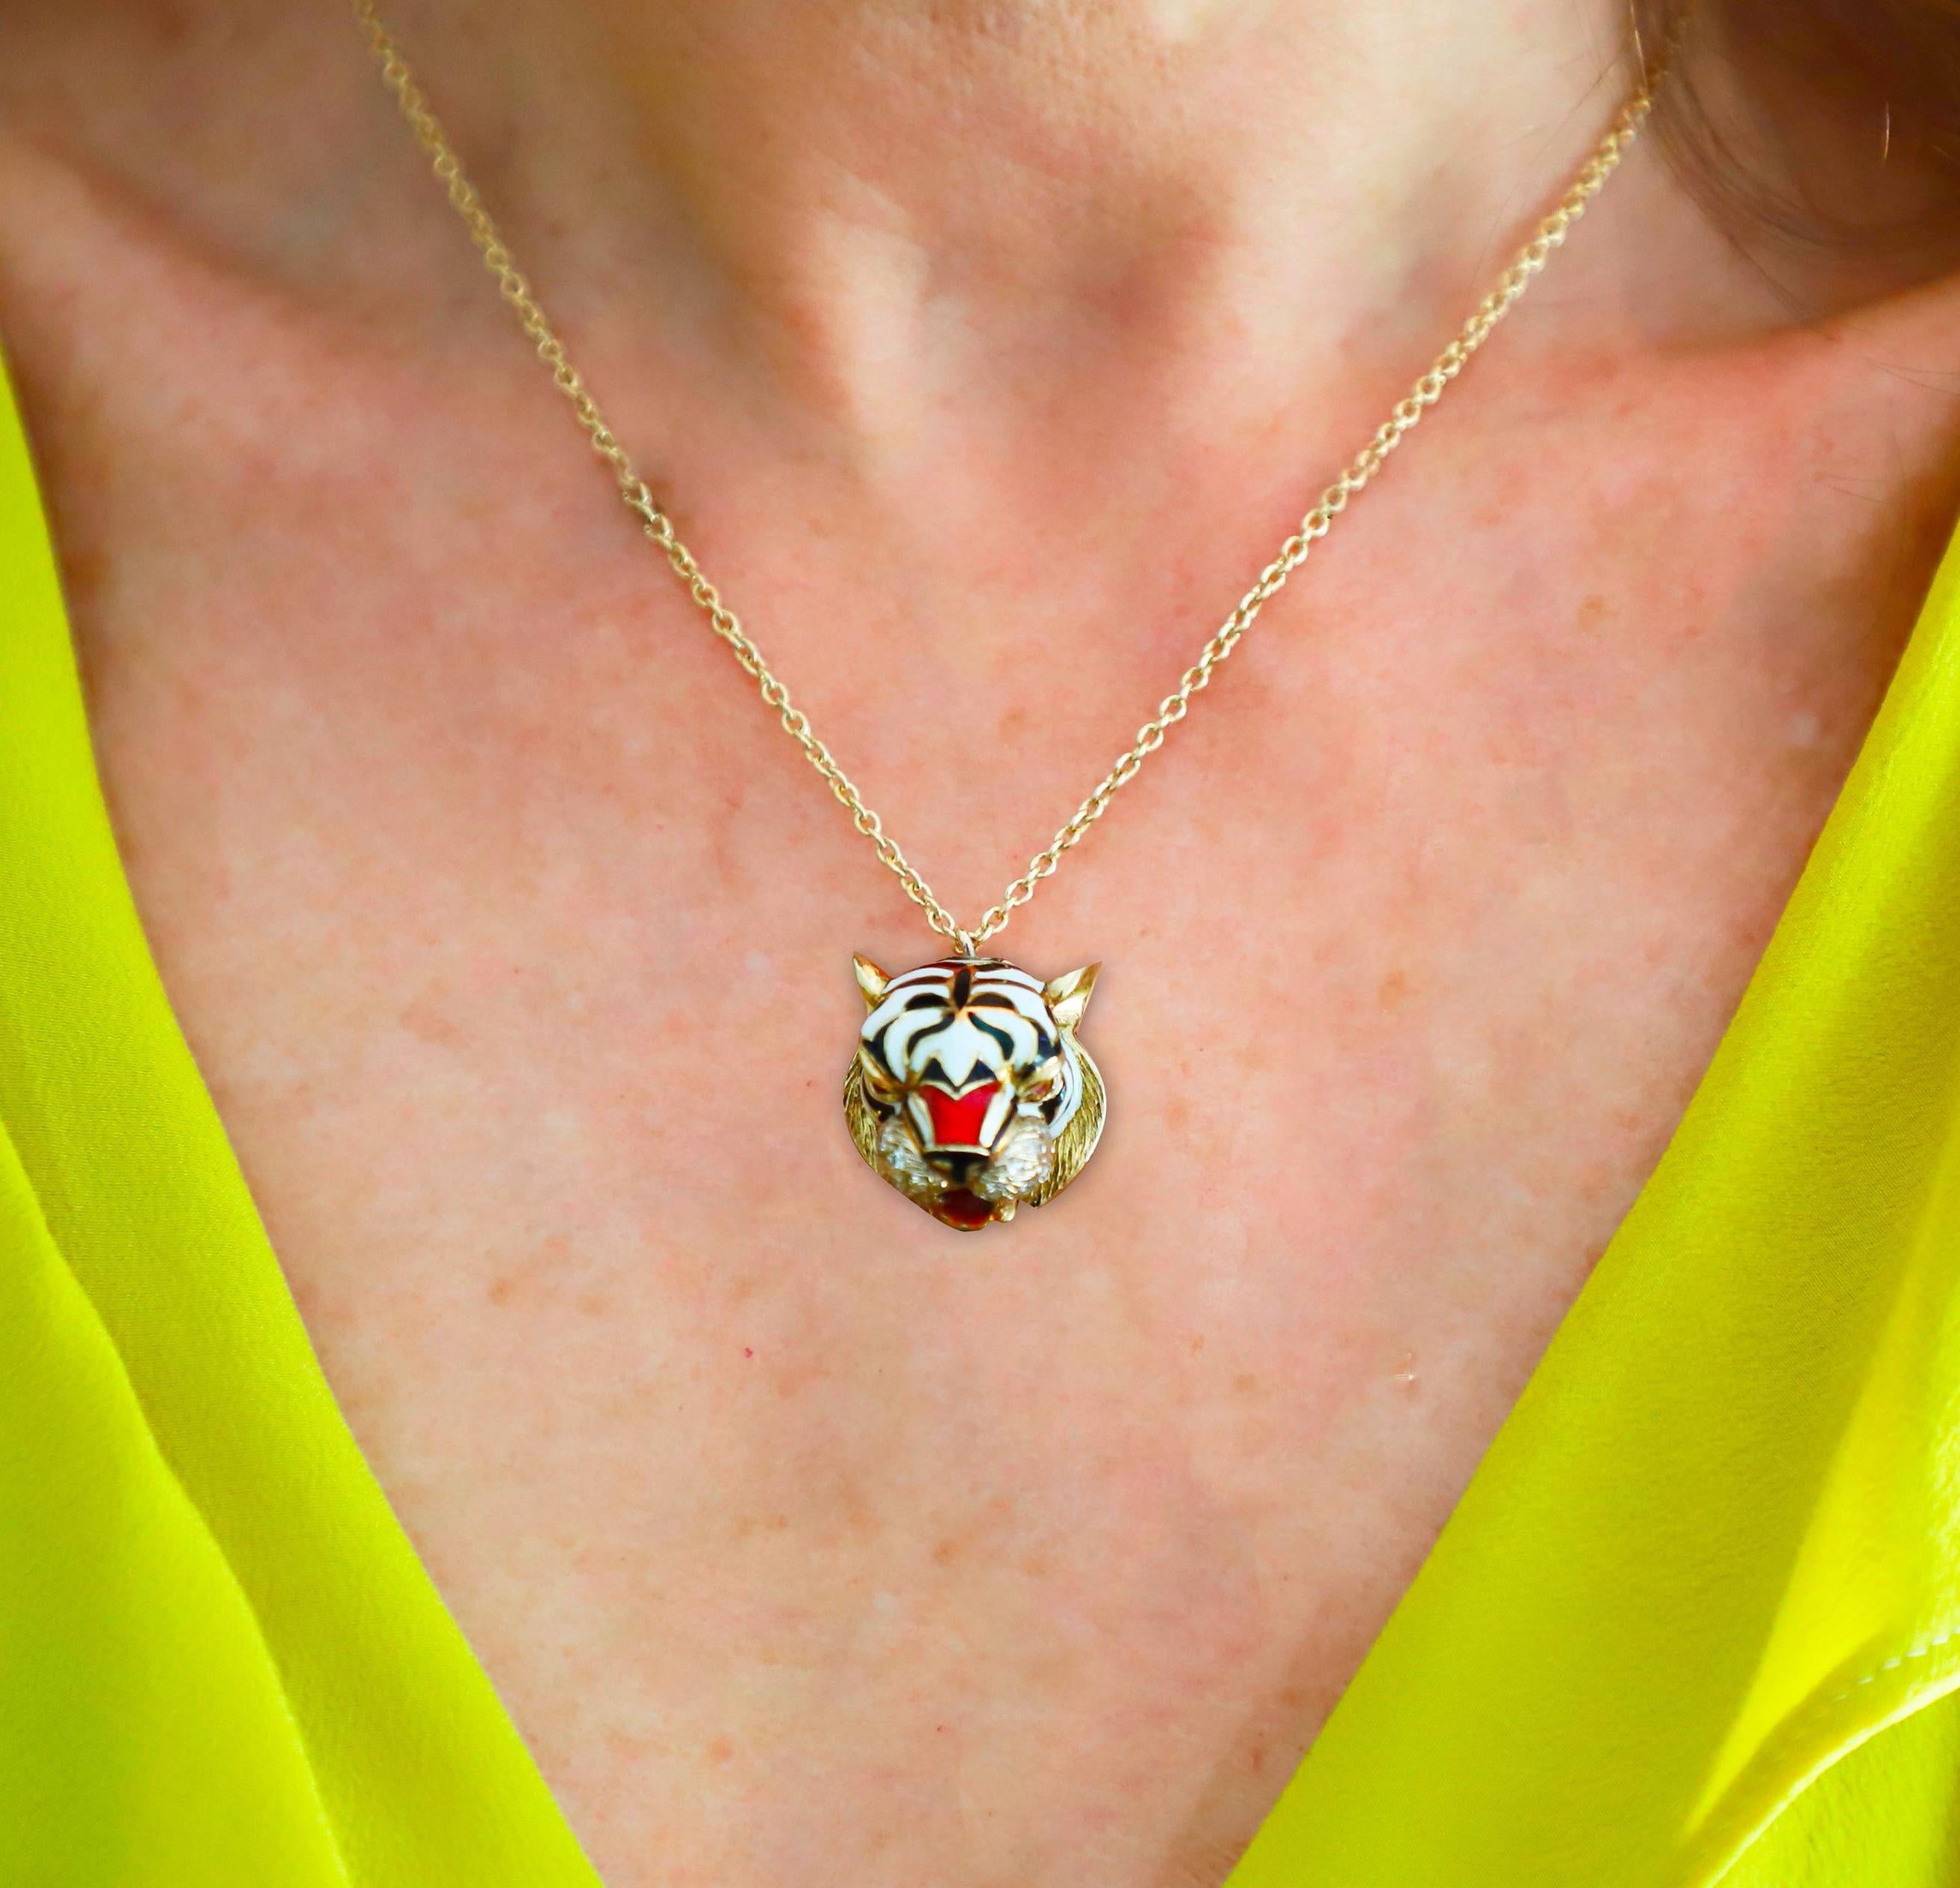 Elevate your style with the remarkable Rossella Ugolini Tiger Pendant Necklace, an embodiment of strength and artistry. Crafted from 18K yellow gold, this pendant boasts 0.06 karat rubies eyes, a 0.20 karat white diamonds mustache, and captivating